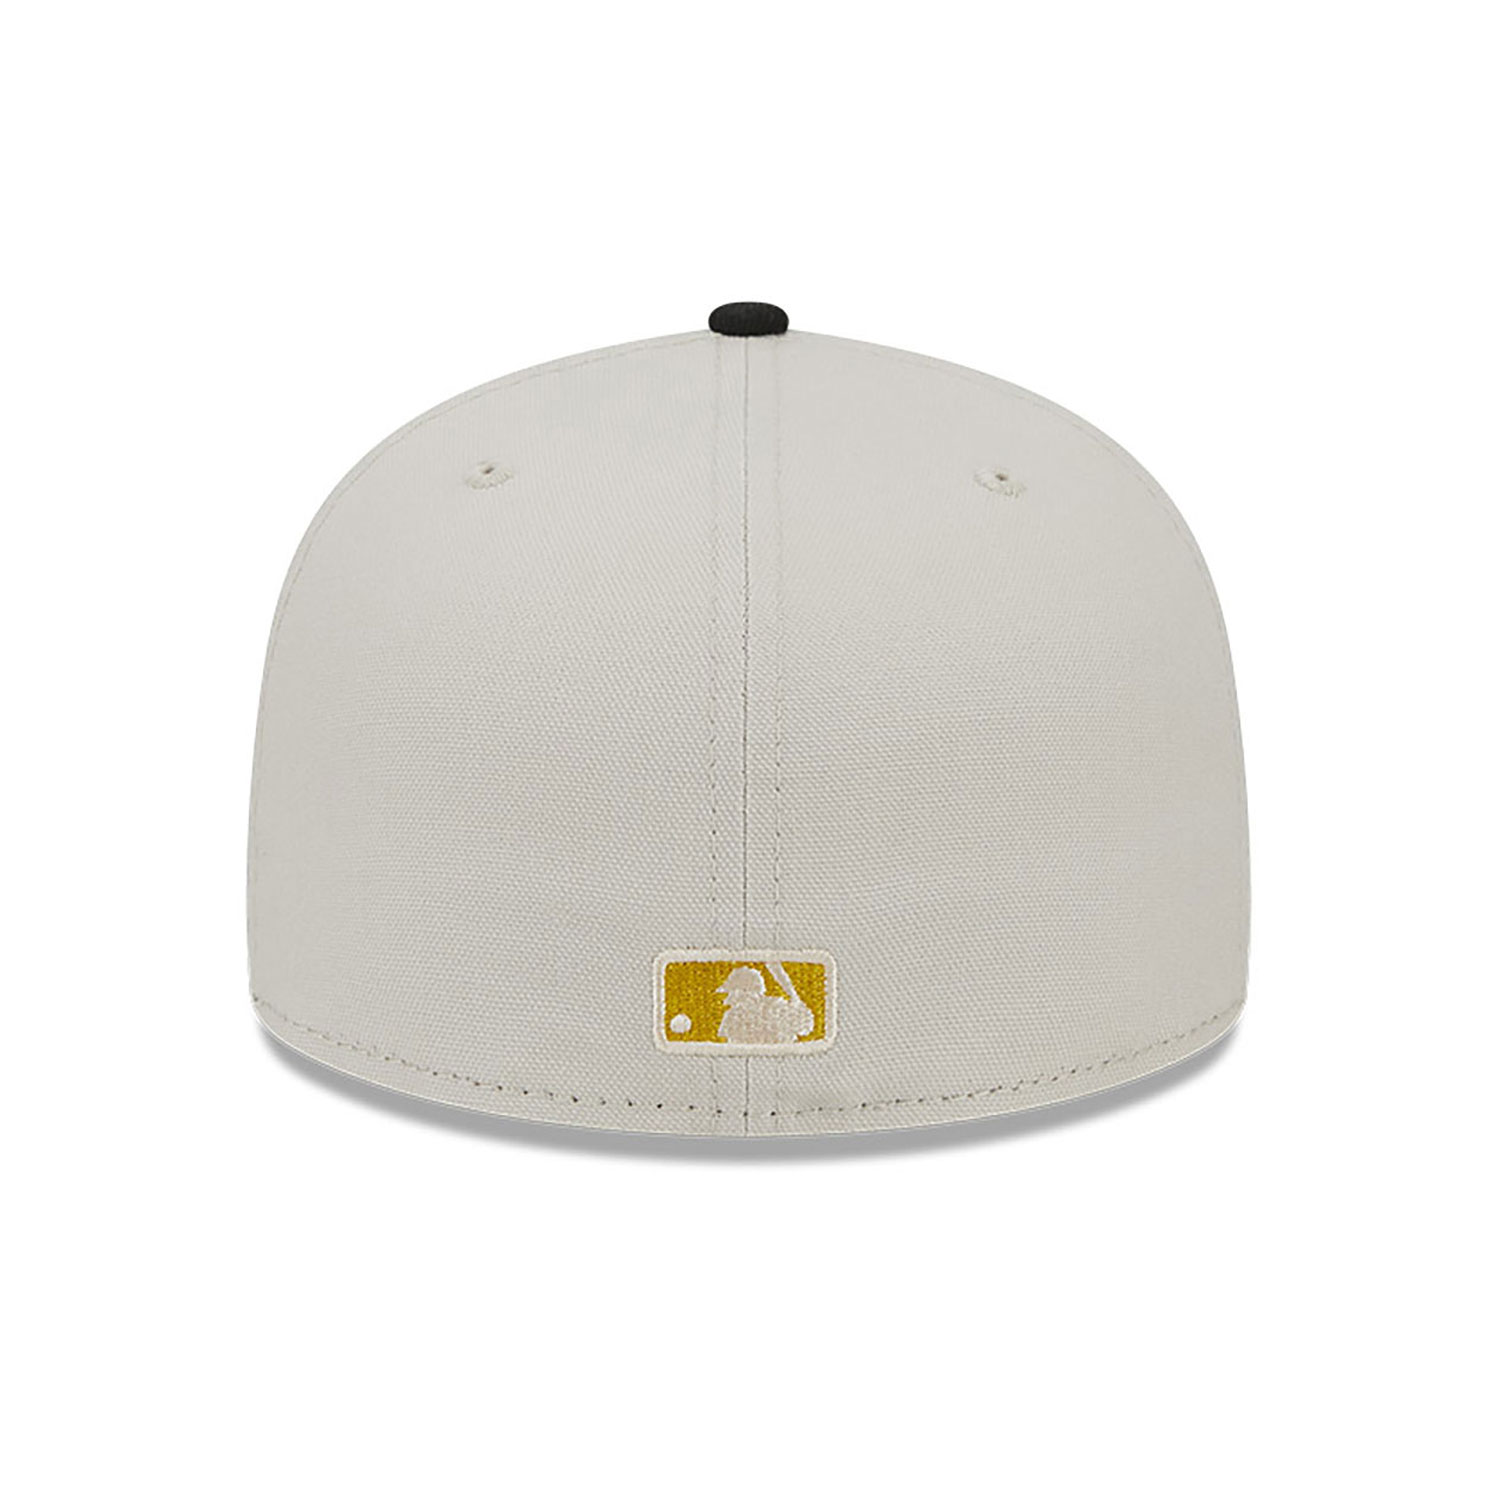 Pittsburgh Pirates Two-Tone Stone 59FIFTY Fitted Cap